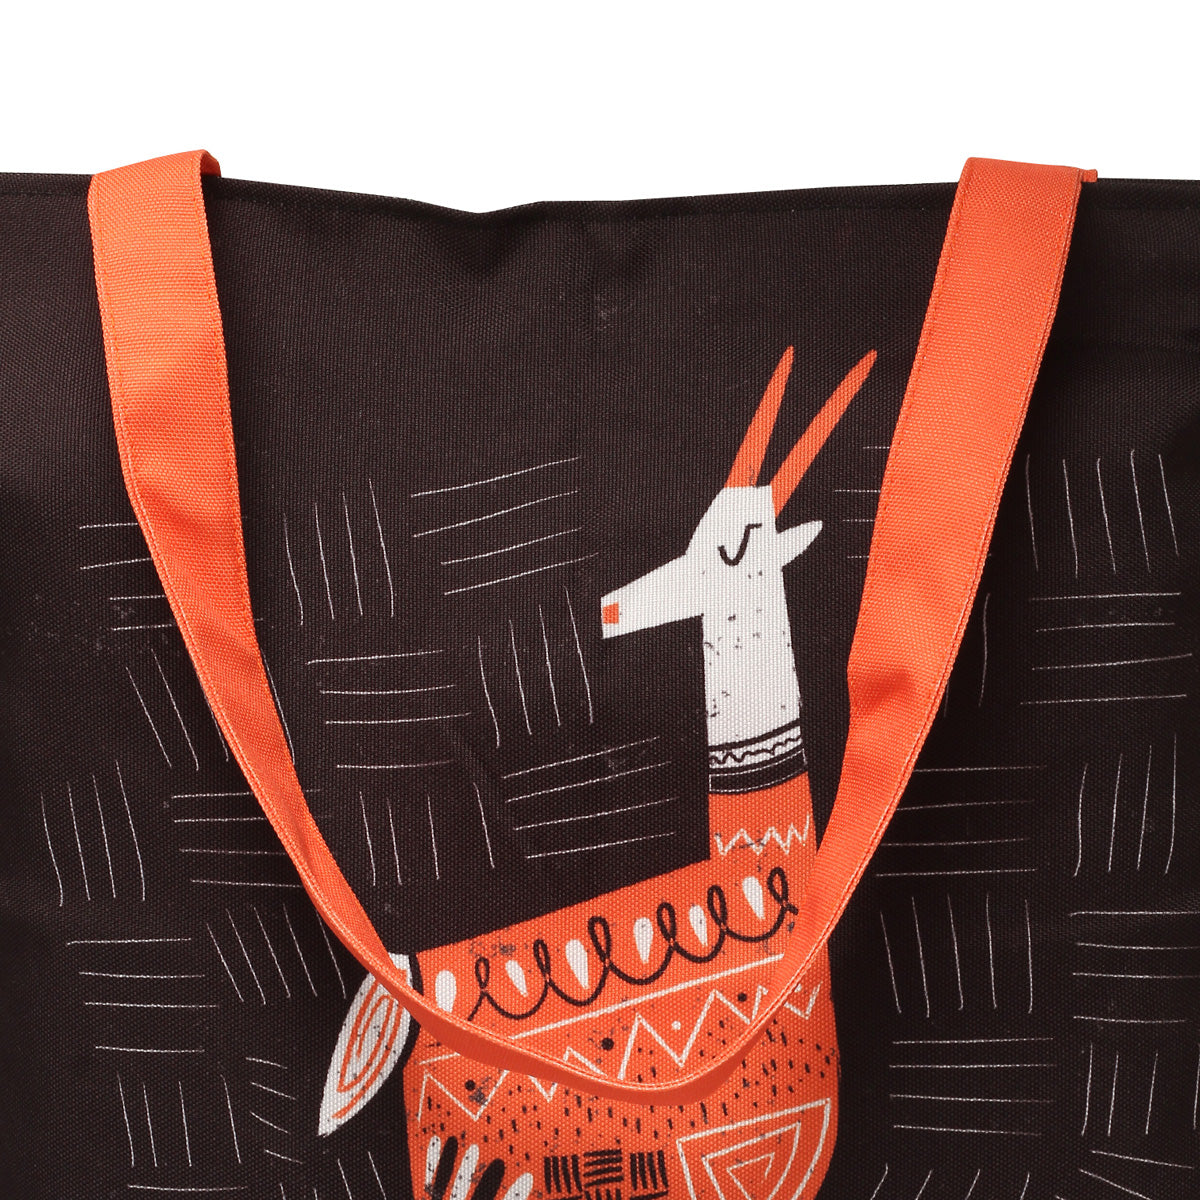 Black tote bag with an orange strap and a printed design of a white llama with orange and black geometric patterns.